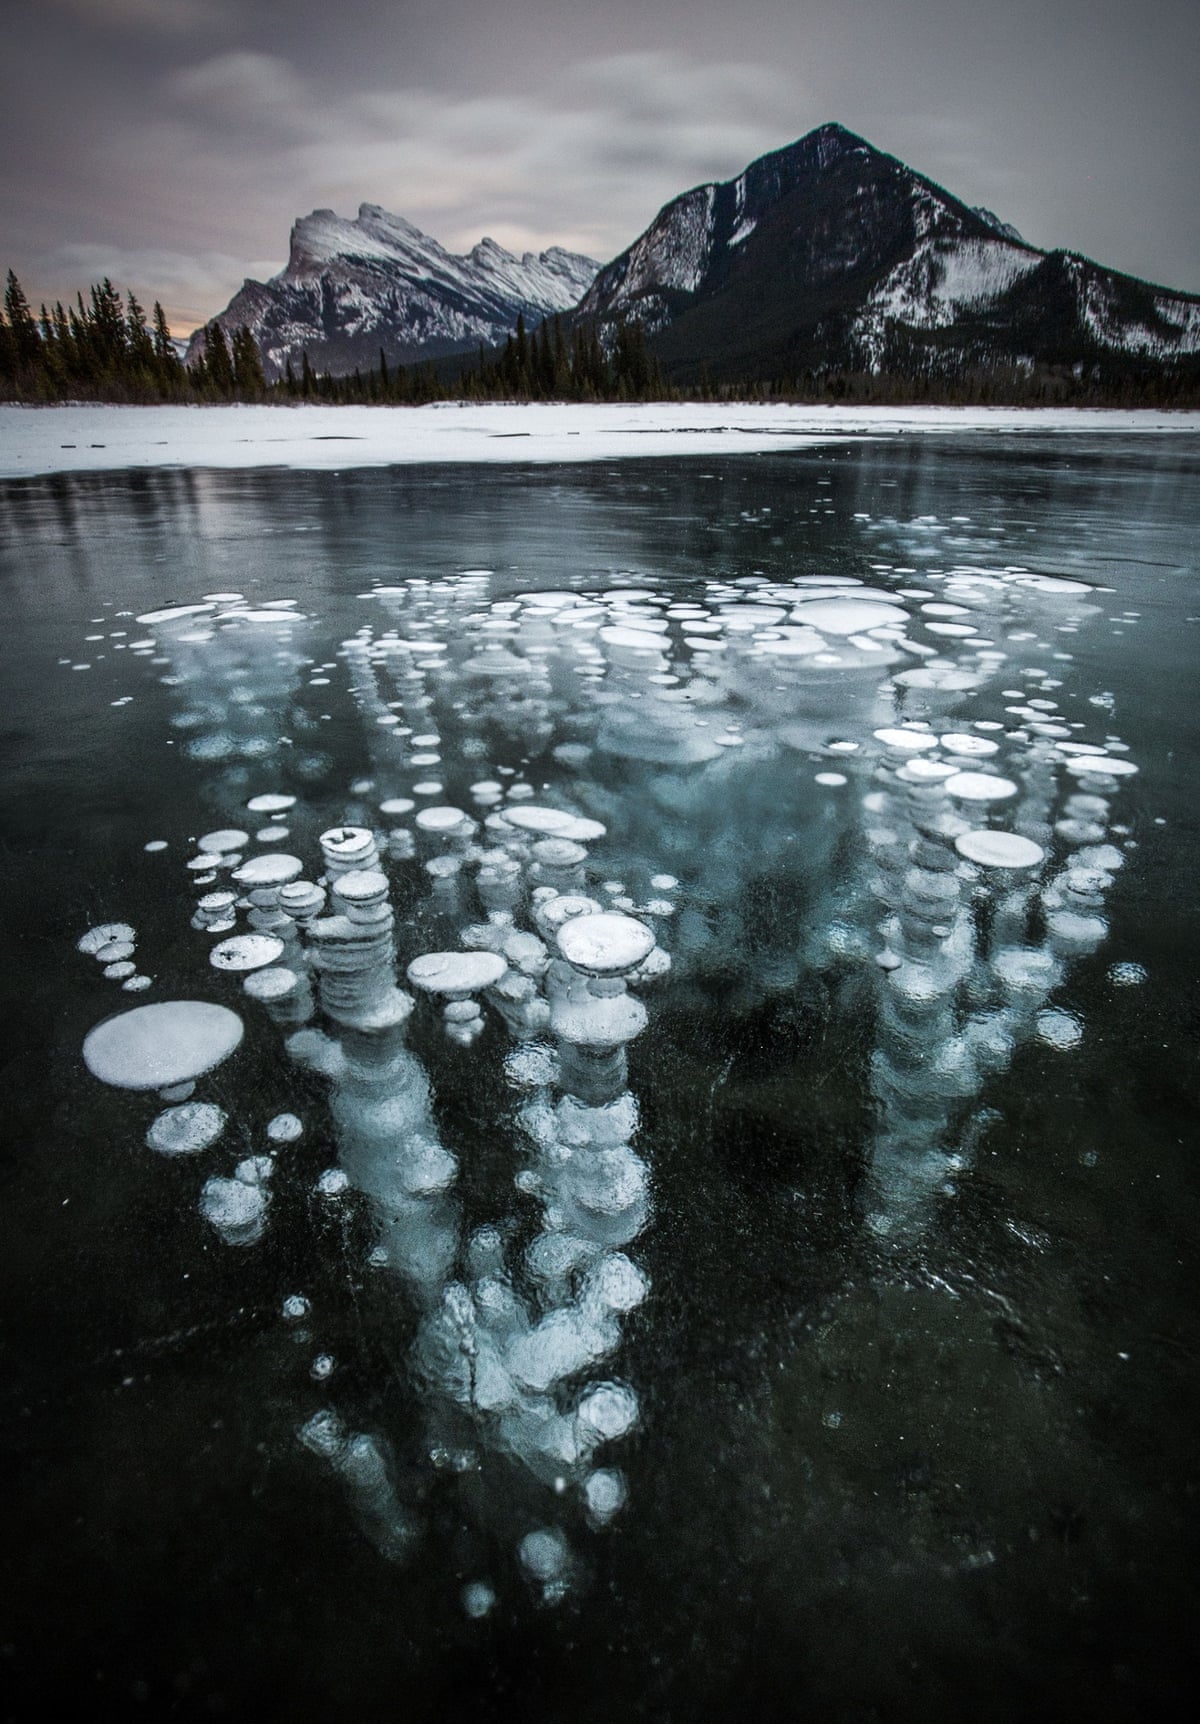 Frozen bubbles in Canadian lakes - in pictures | World news | The Guardian 6.7 Cummins Bubbles In Coolant Reservoir